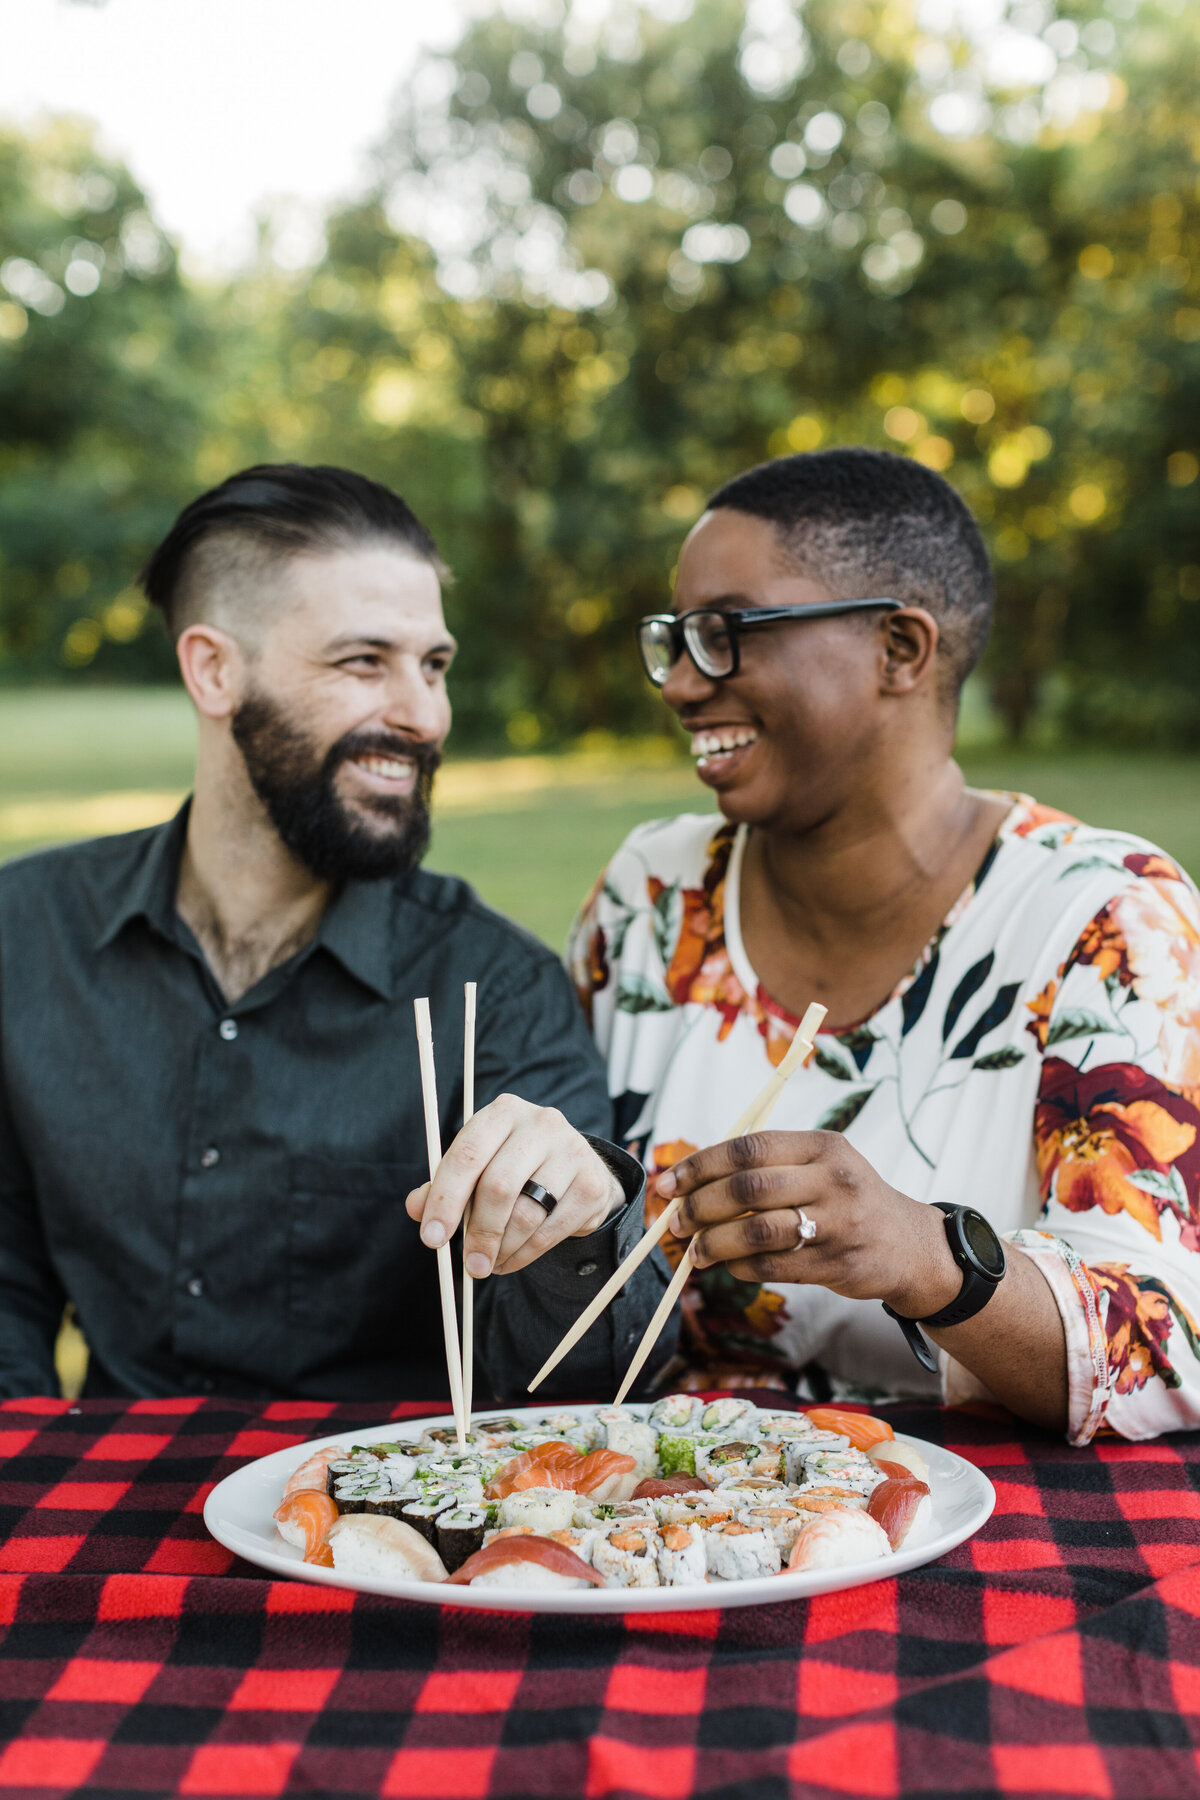 A couple smiling at each other while sharing a plate of sushi during their outdoor engagement session in Fort Worth, Texas. The woman on the right is wearing a white top covered in colorful flowers and glasses. The man on the left is wearing a dark button up shirt. The plate of sushi rests on a gingham tablecloth.